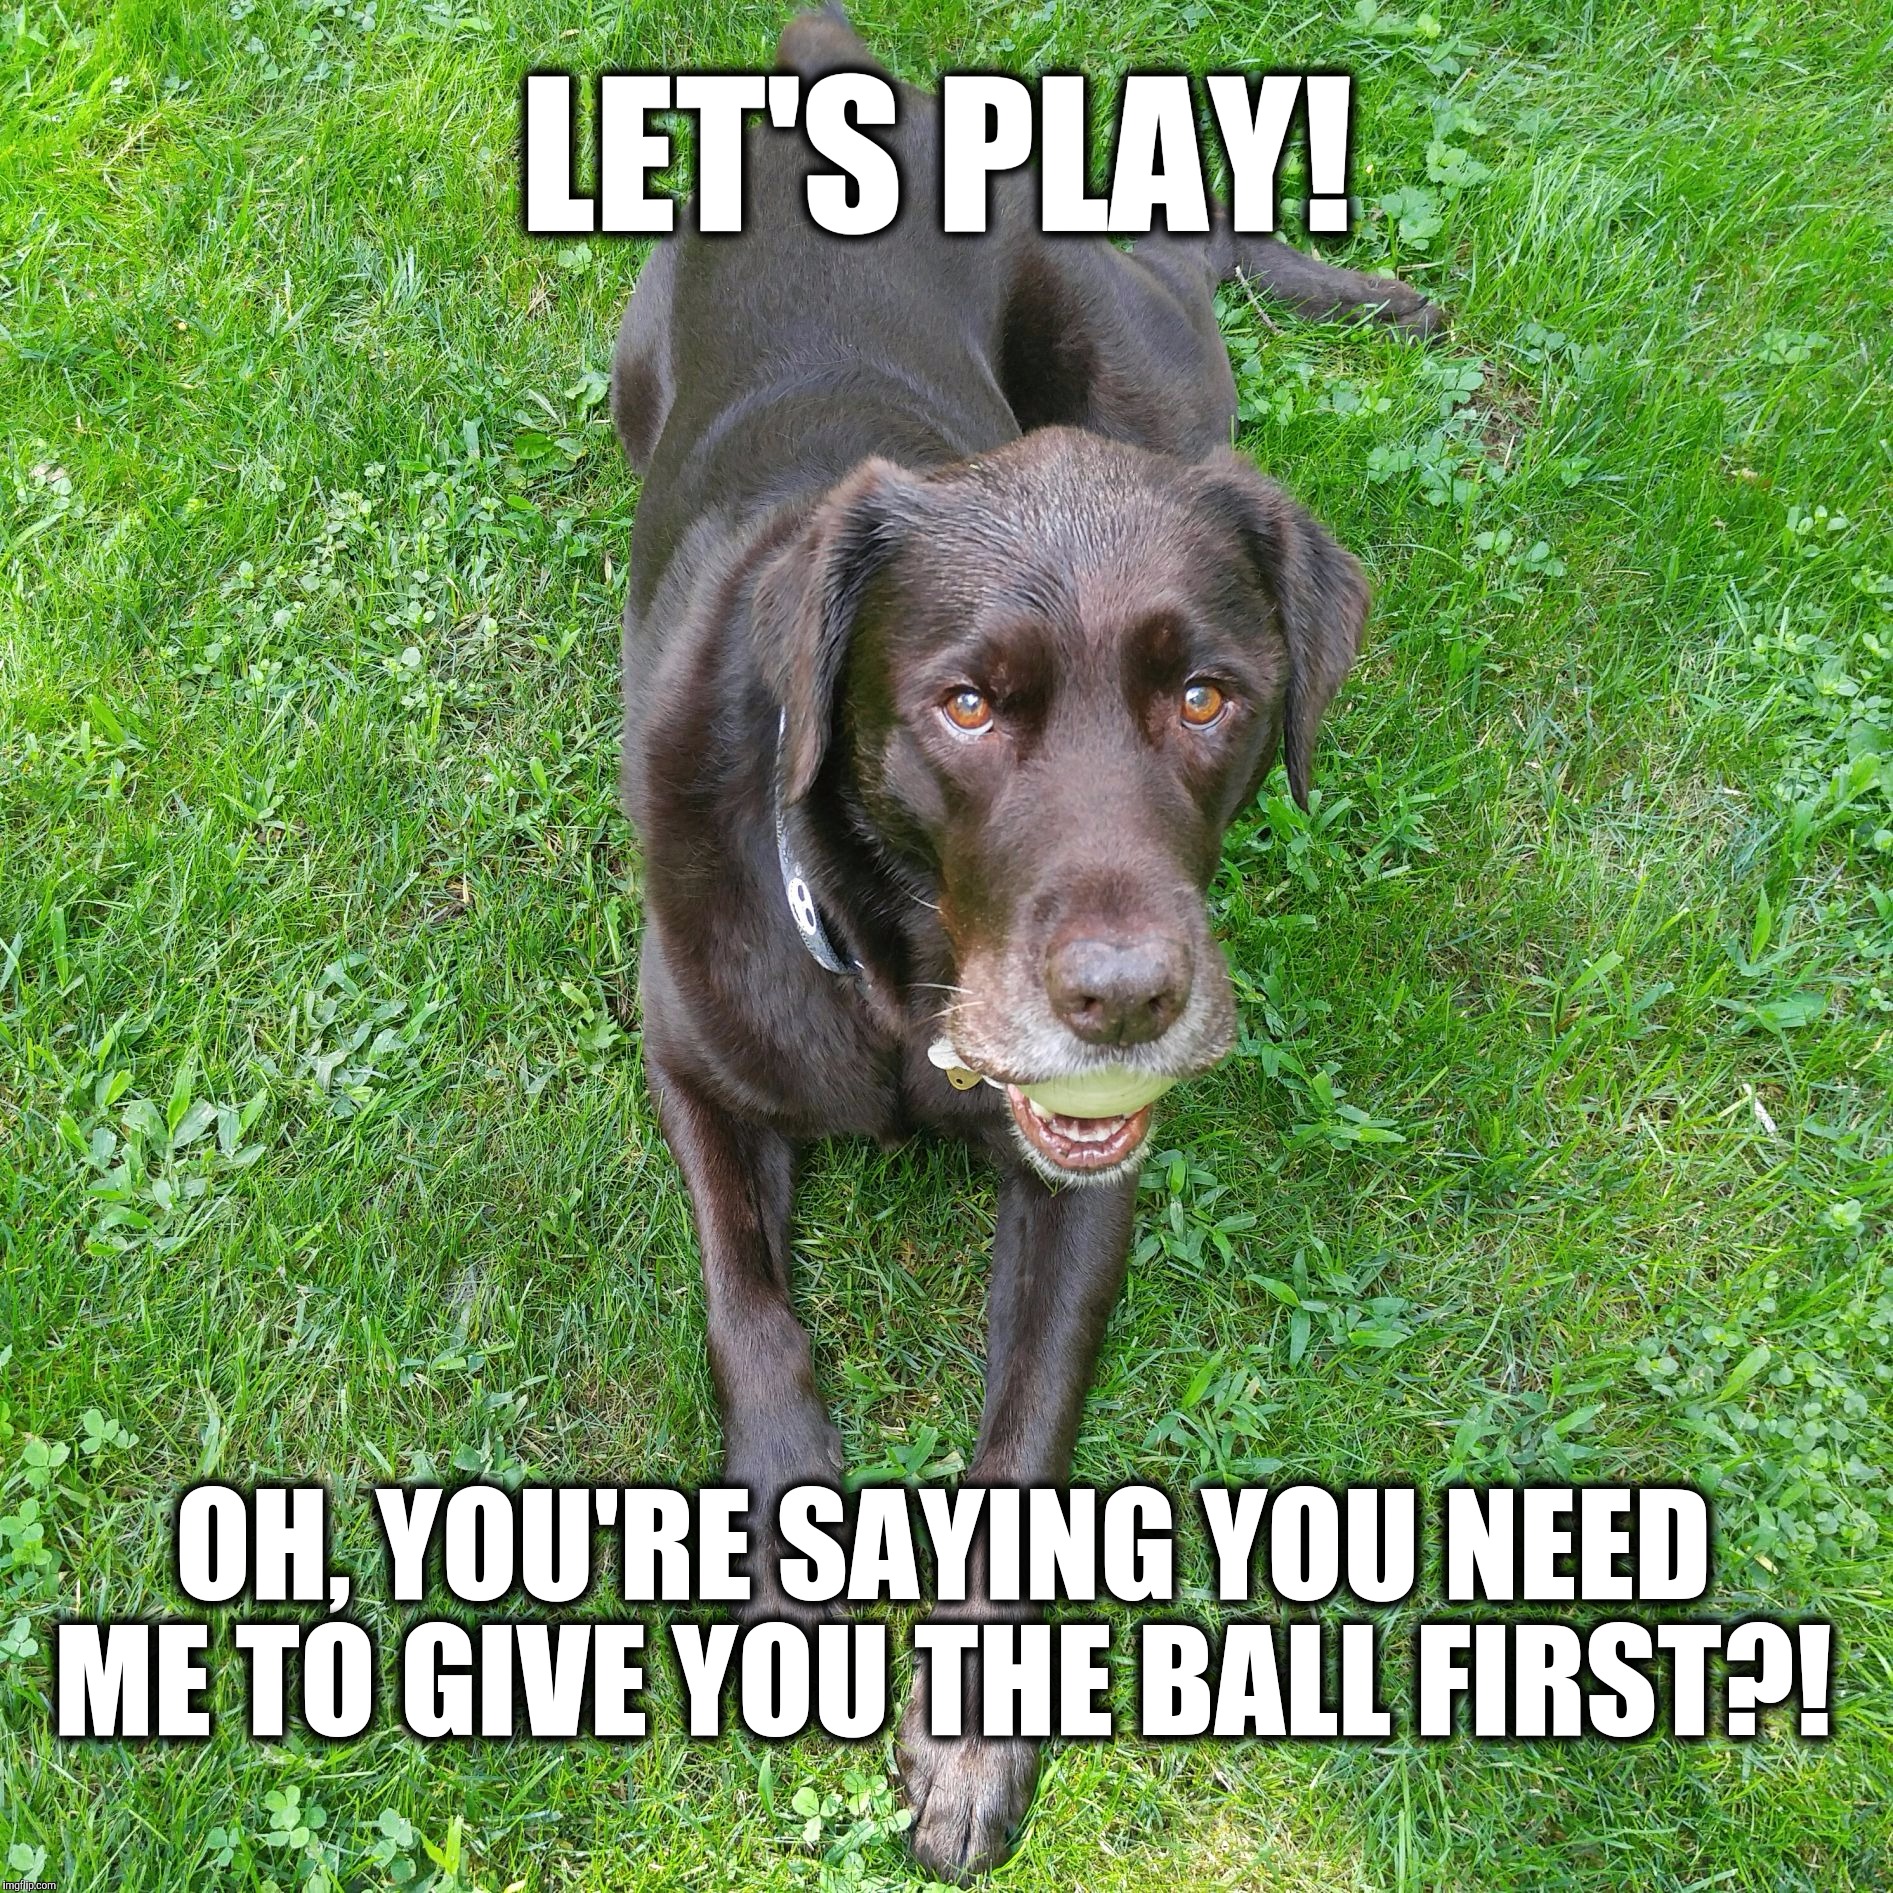 Let's Play!  | LET'S PLAY! OH, YOU'RE SAYING YOU NEED ME TO GIVE YOU THE BALL FIRST?! | image tagged in play,ball,chuckie the chocolate lab,dog meme,summer,funny memes | made w/ Imgflip meme maker